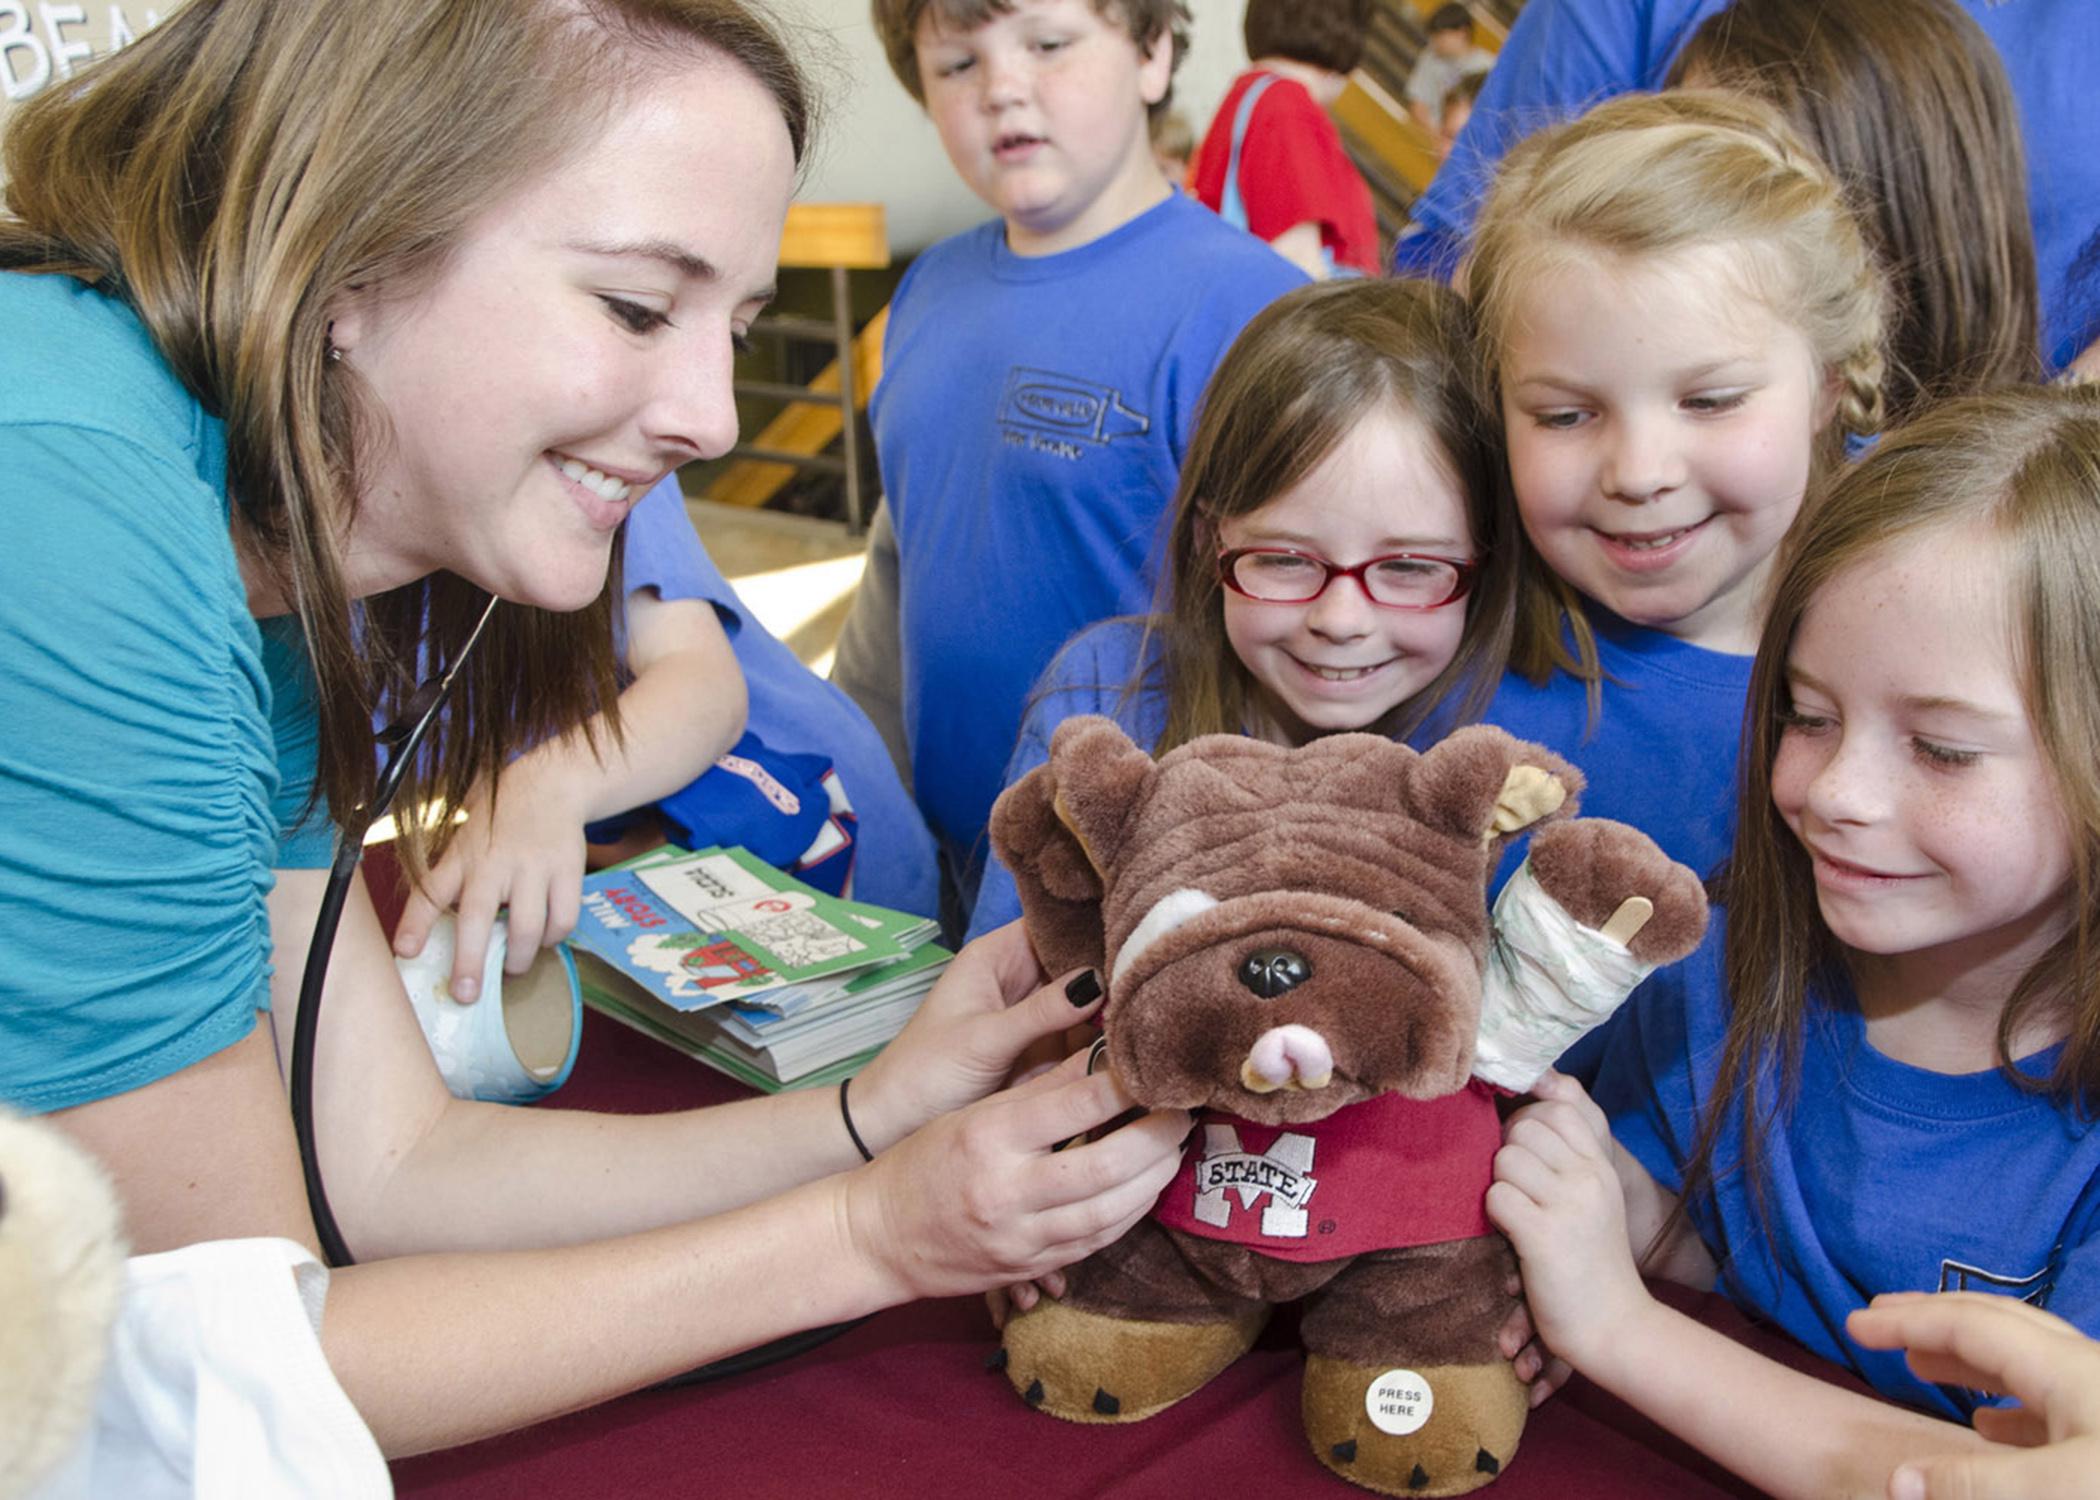 Pre-registered school groups will attend the Mississippi State University College of Veterinary Open House on April 5. Students, such as these at the 2012 event, enjoy the hands-on activities and demonstrations. (Photo by MSU College of Veterinary Medicine/Tom Thompson)